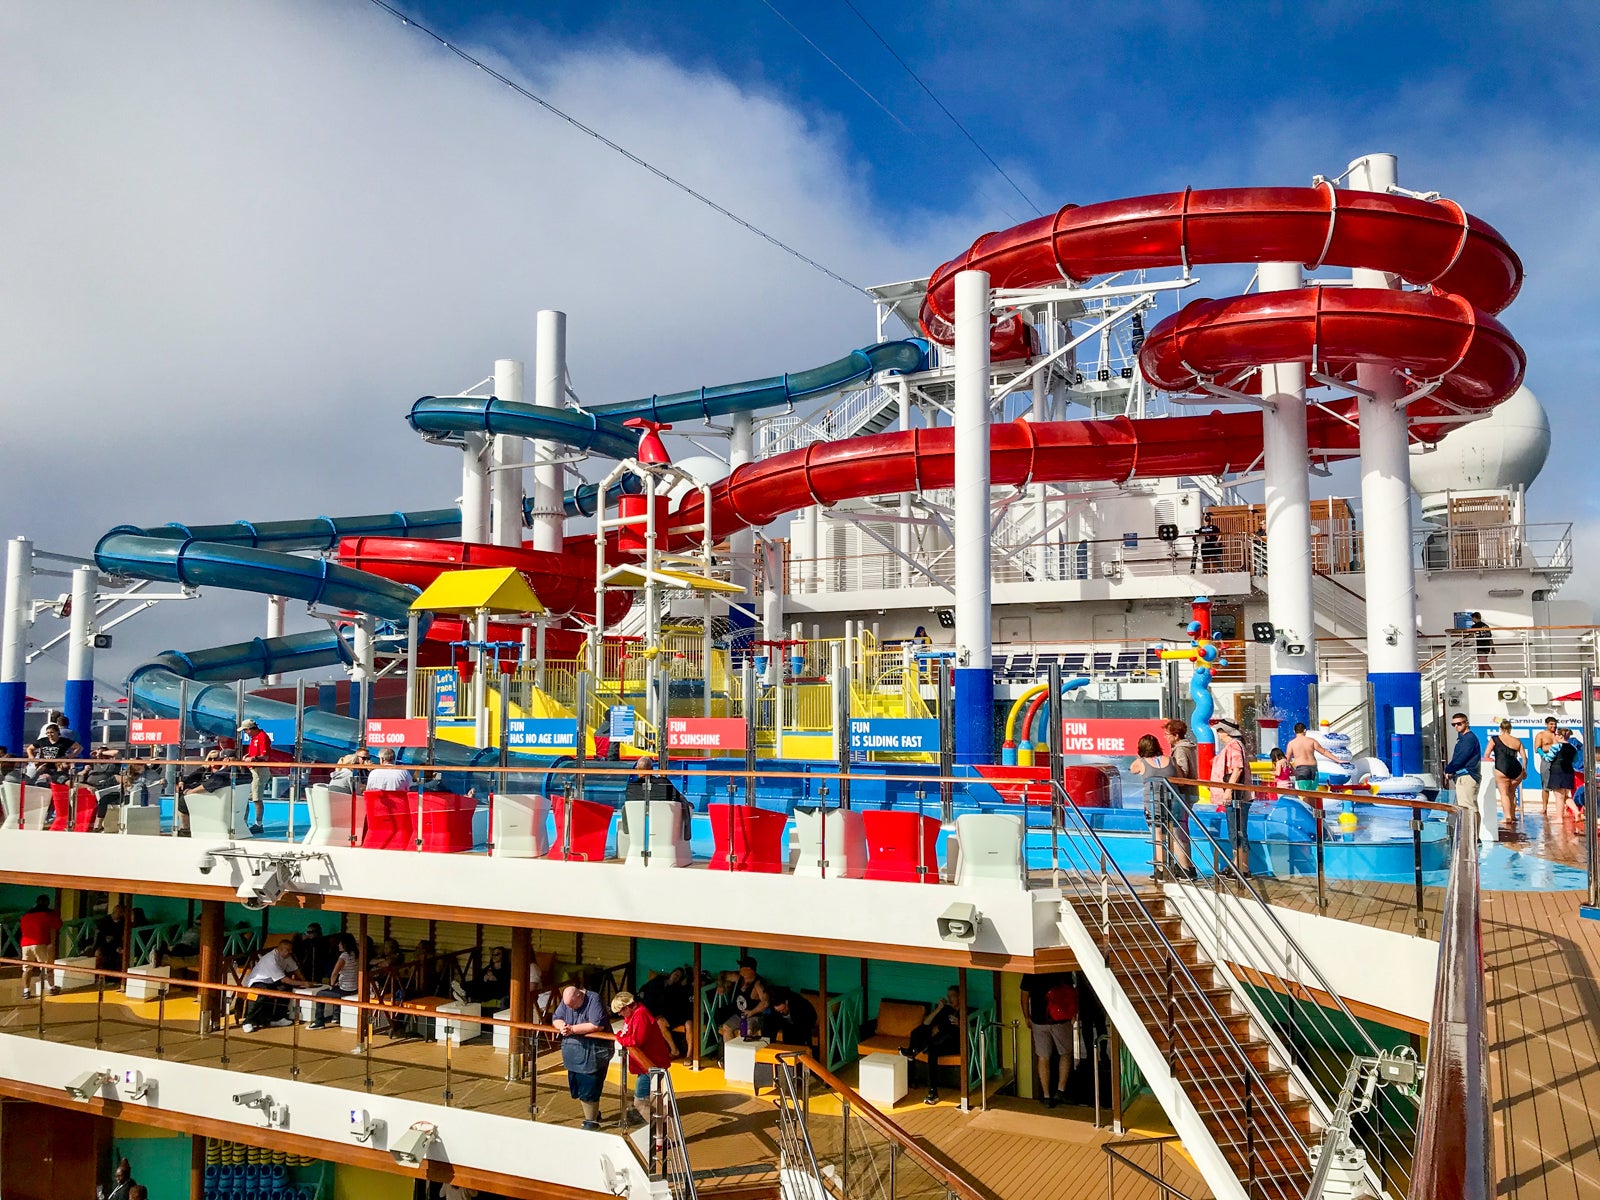 carnival cruise ships best to worst